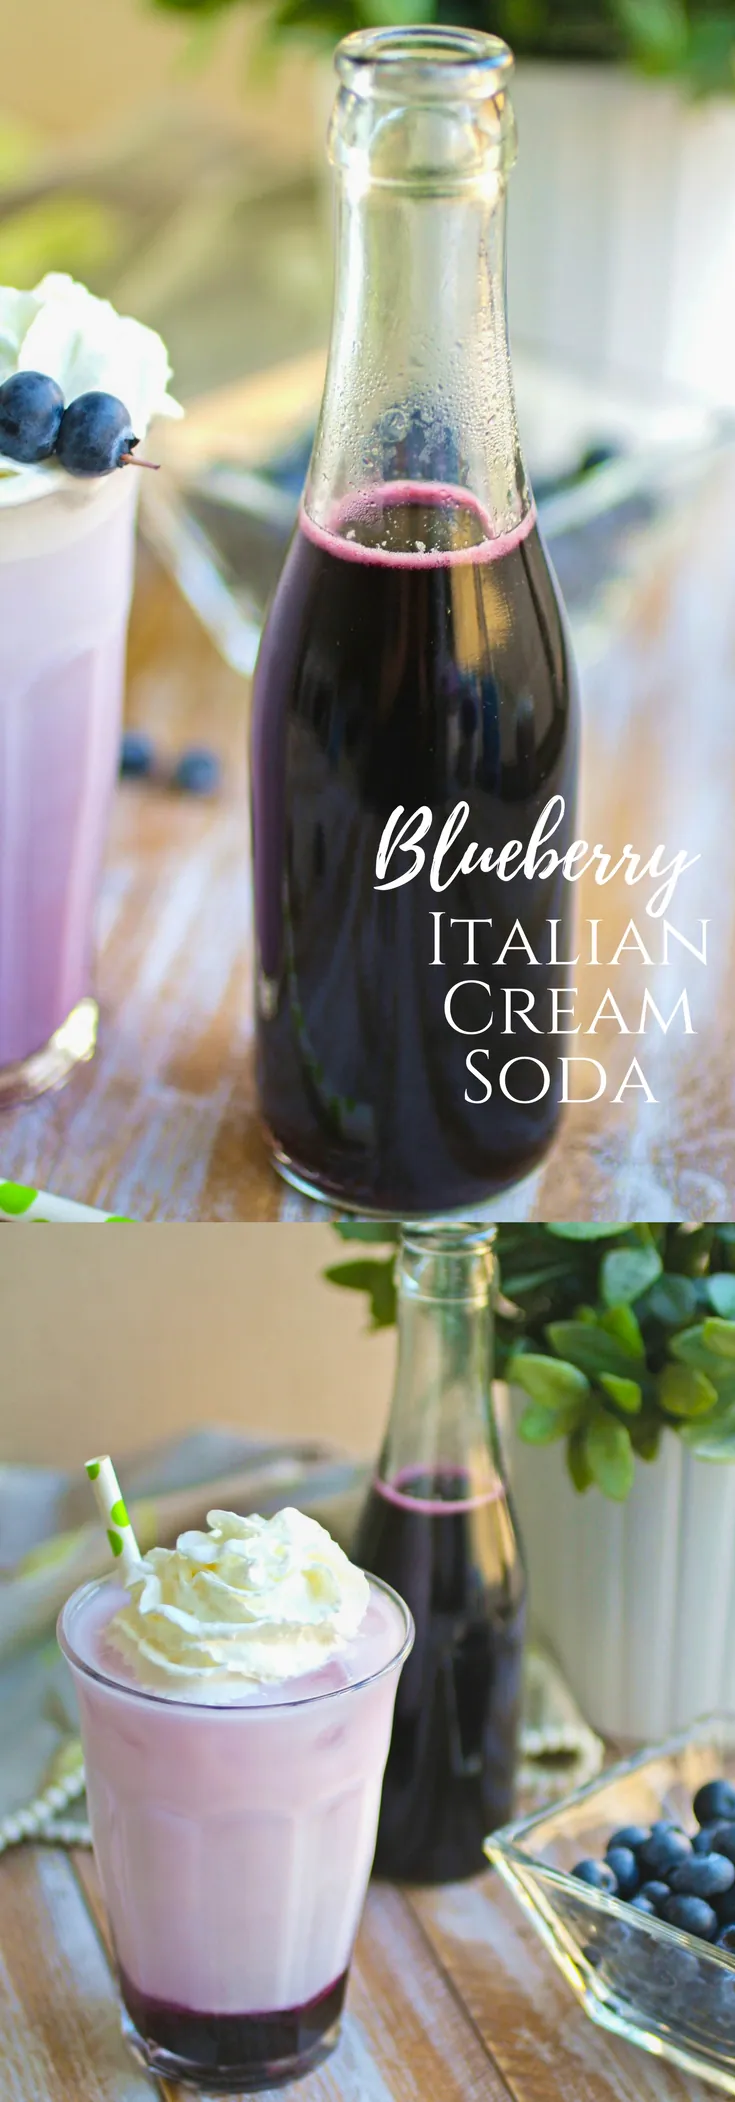 Blueberry Italian Cream Soda drinks are fun to indulge in. You'll love these Blueberry Italian Cream Soda drinks you can make at home.